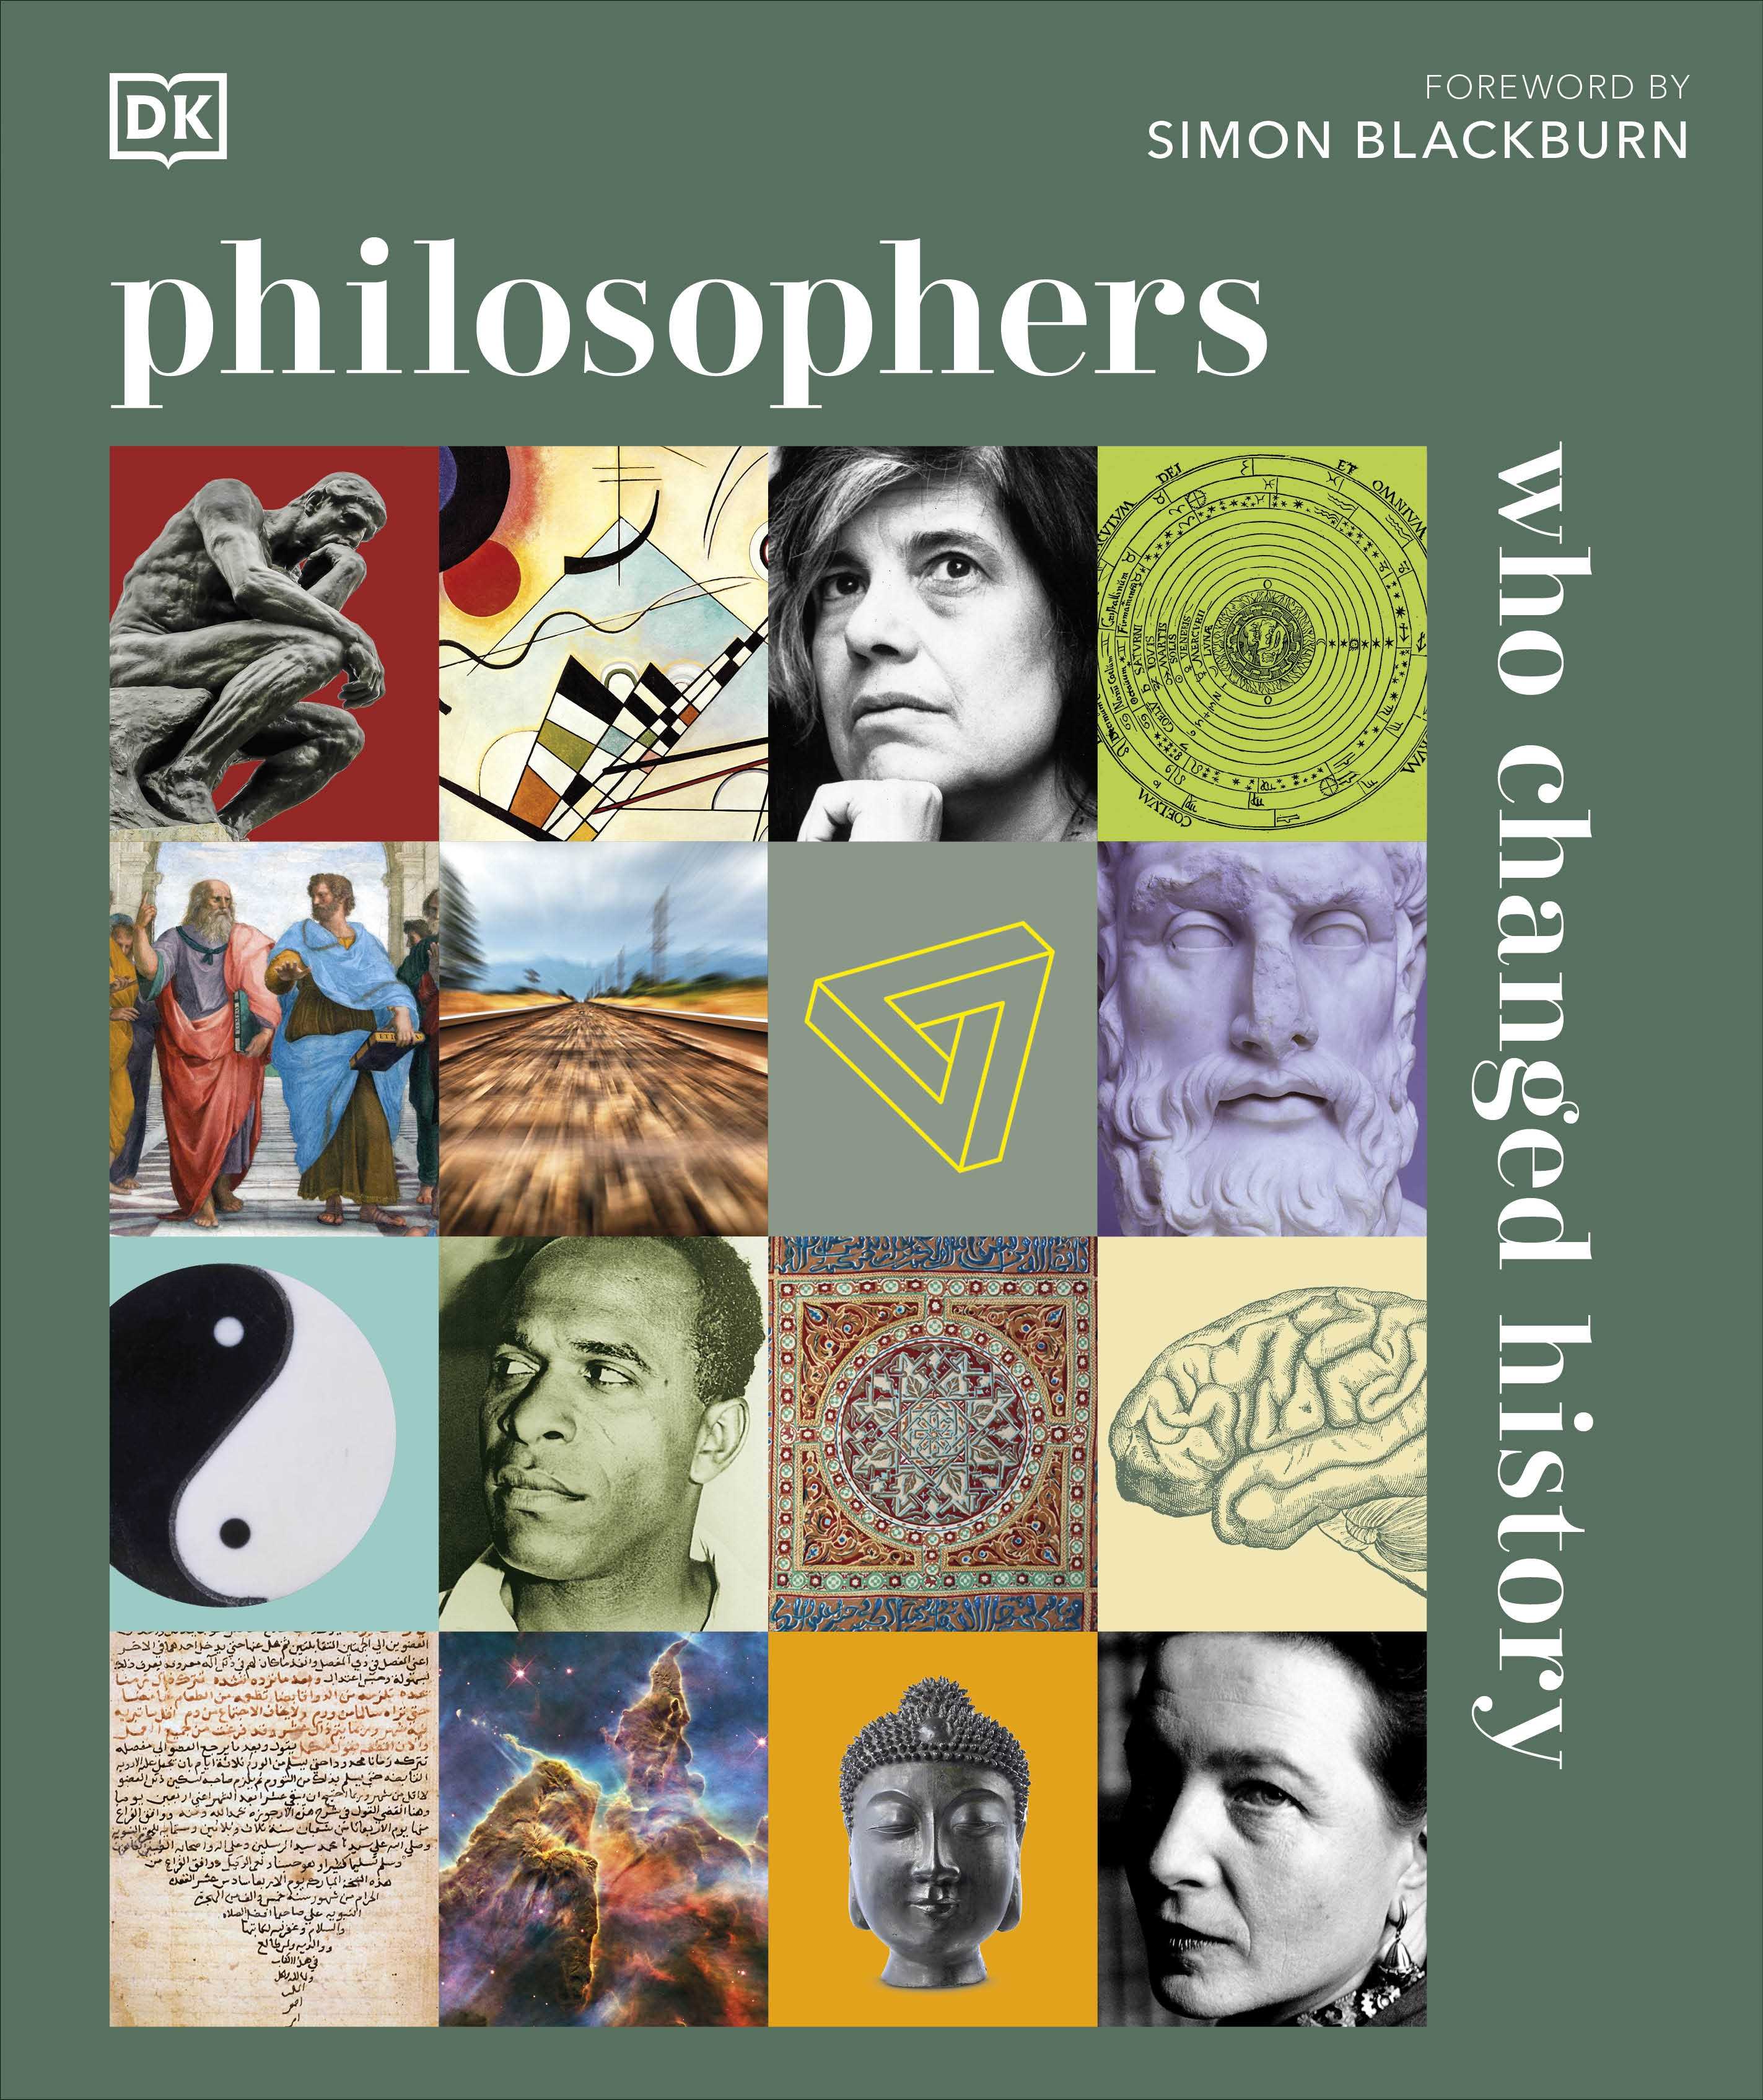 Philosophers Who Changed History (DK History Changers)